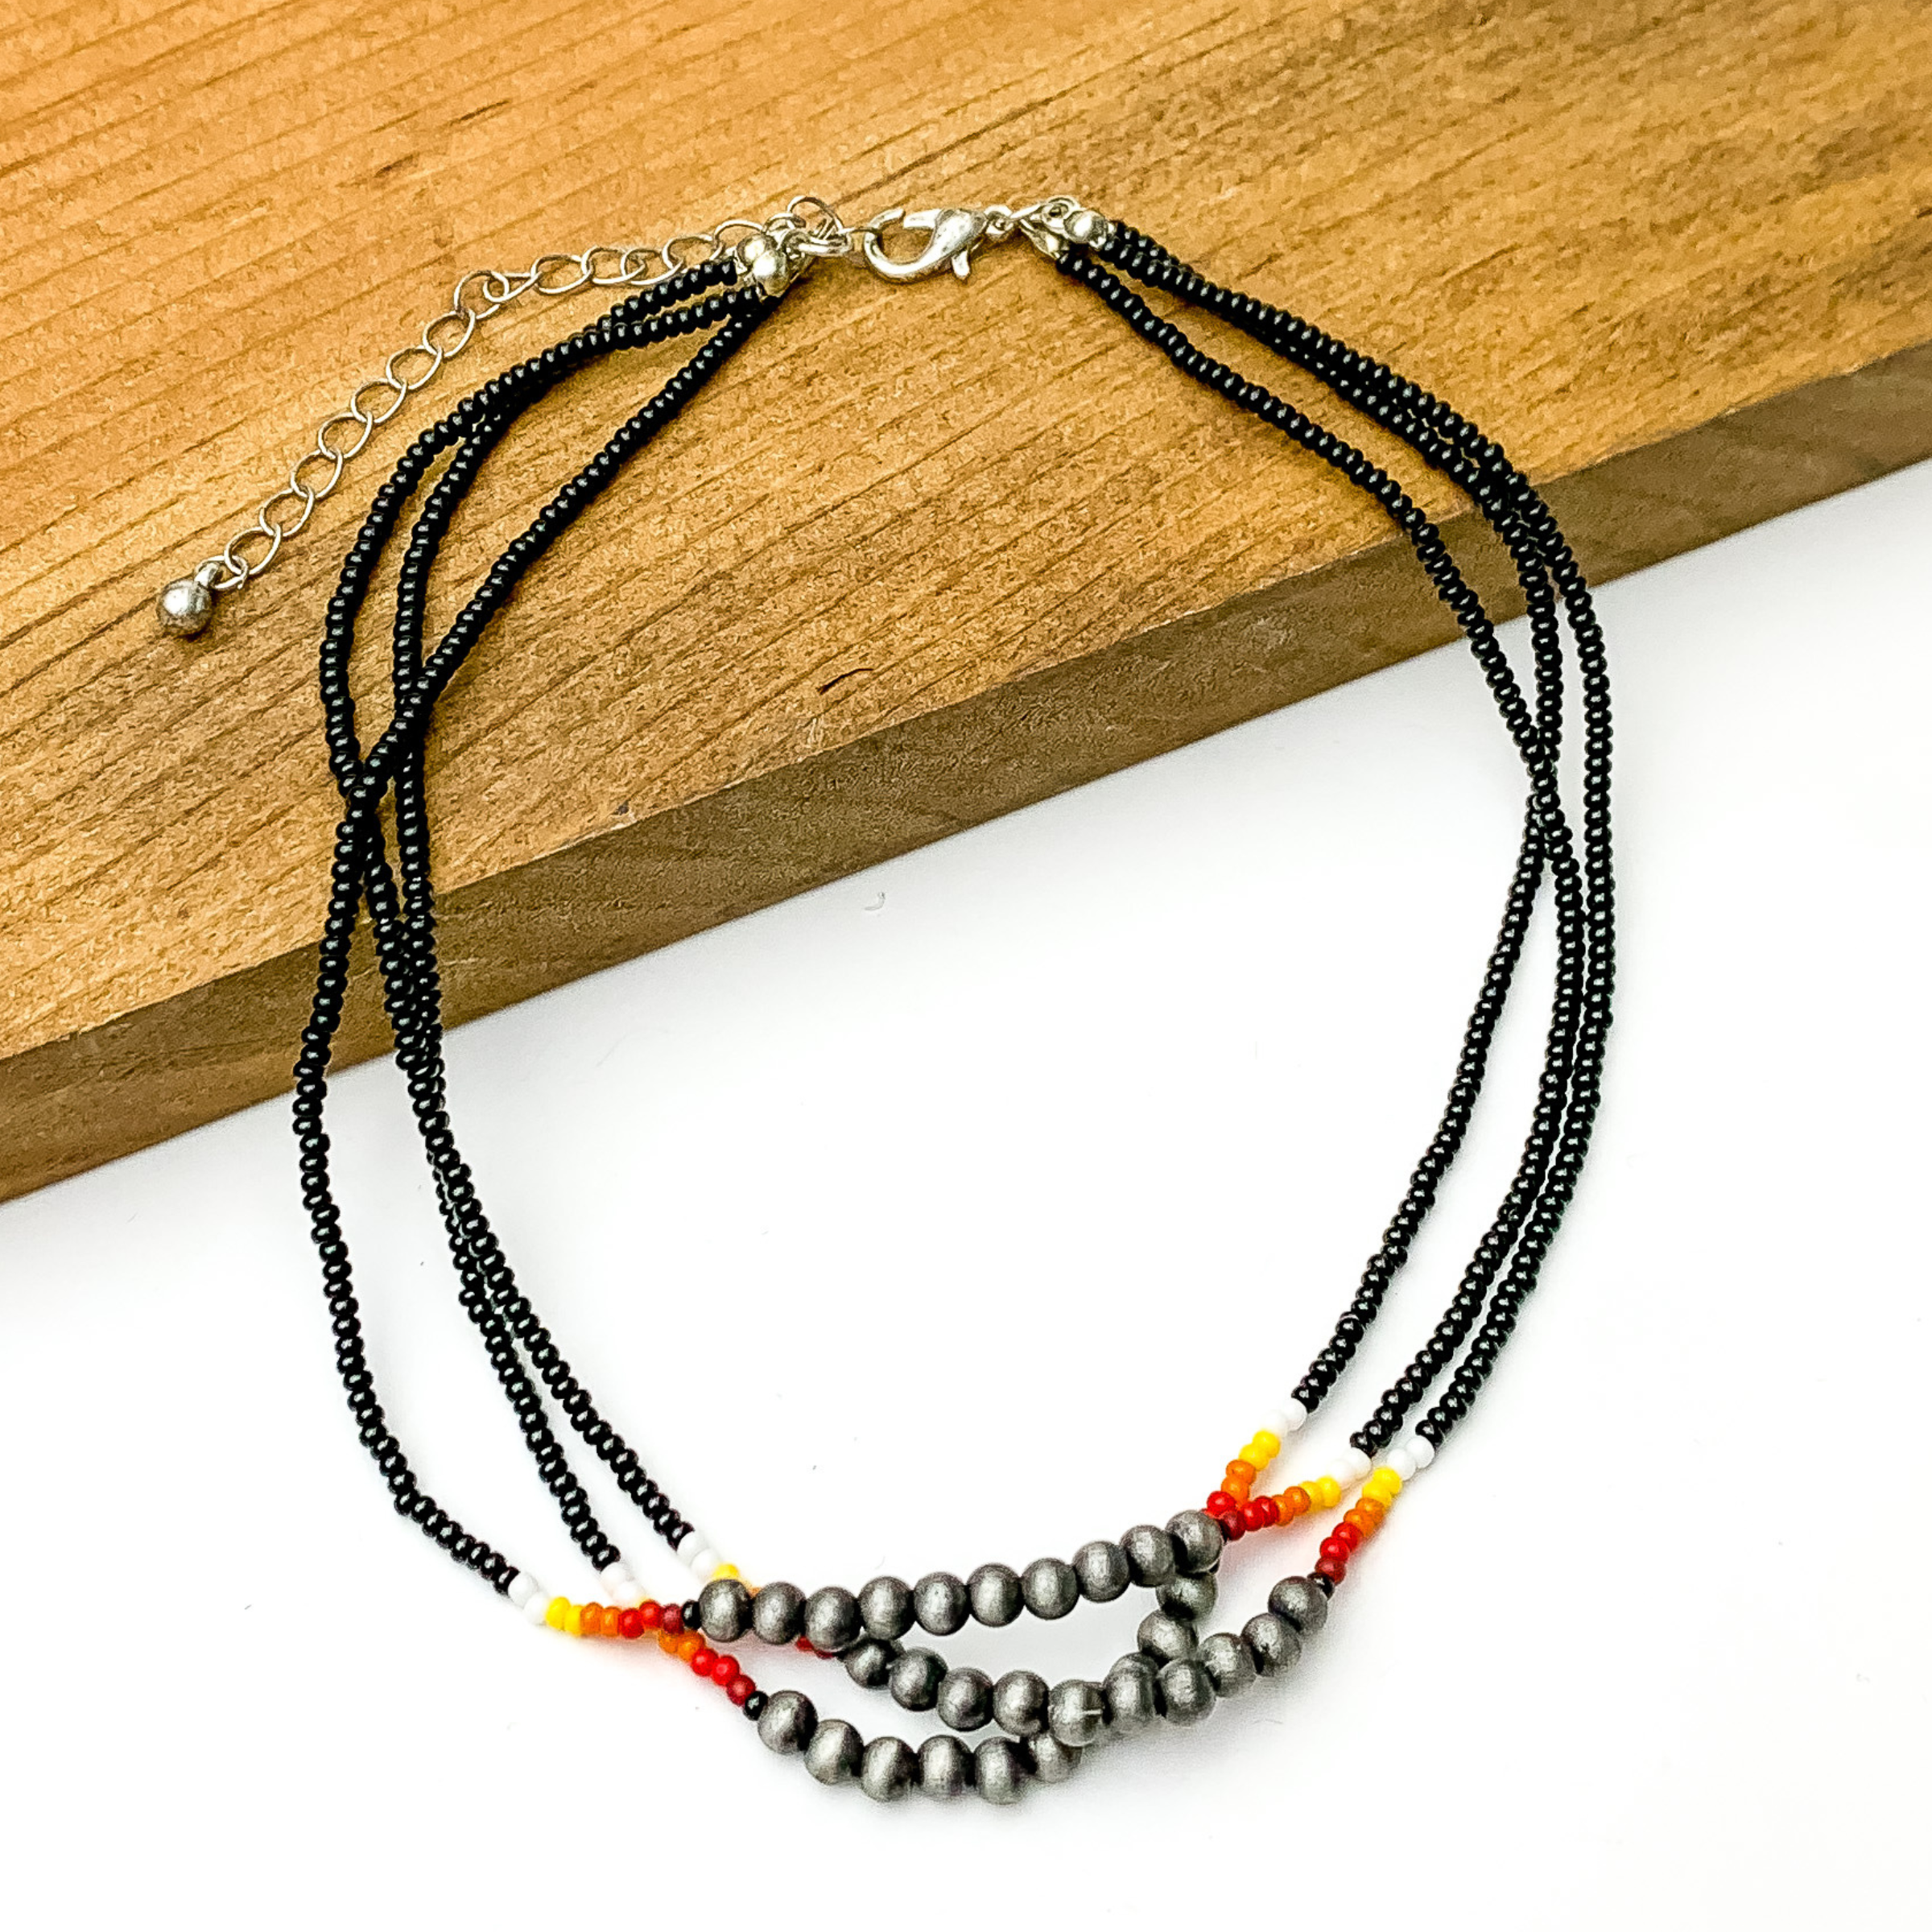 Three stranded necklace with mostly black beads. This necklace also includes a segment of silver beads on each strand with a couple white, red, and orange beads on each side of the segment. This necklace is pictured partially on a block of wood on a white background.  